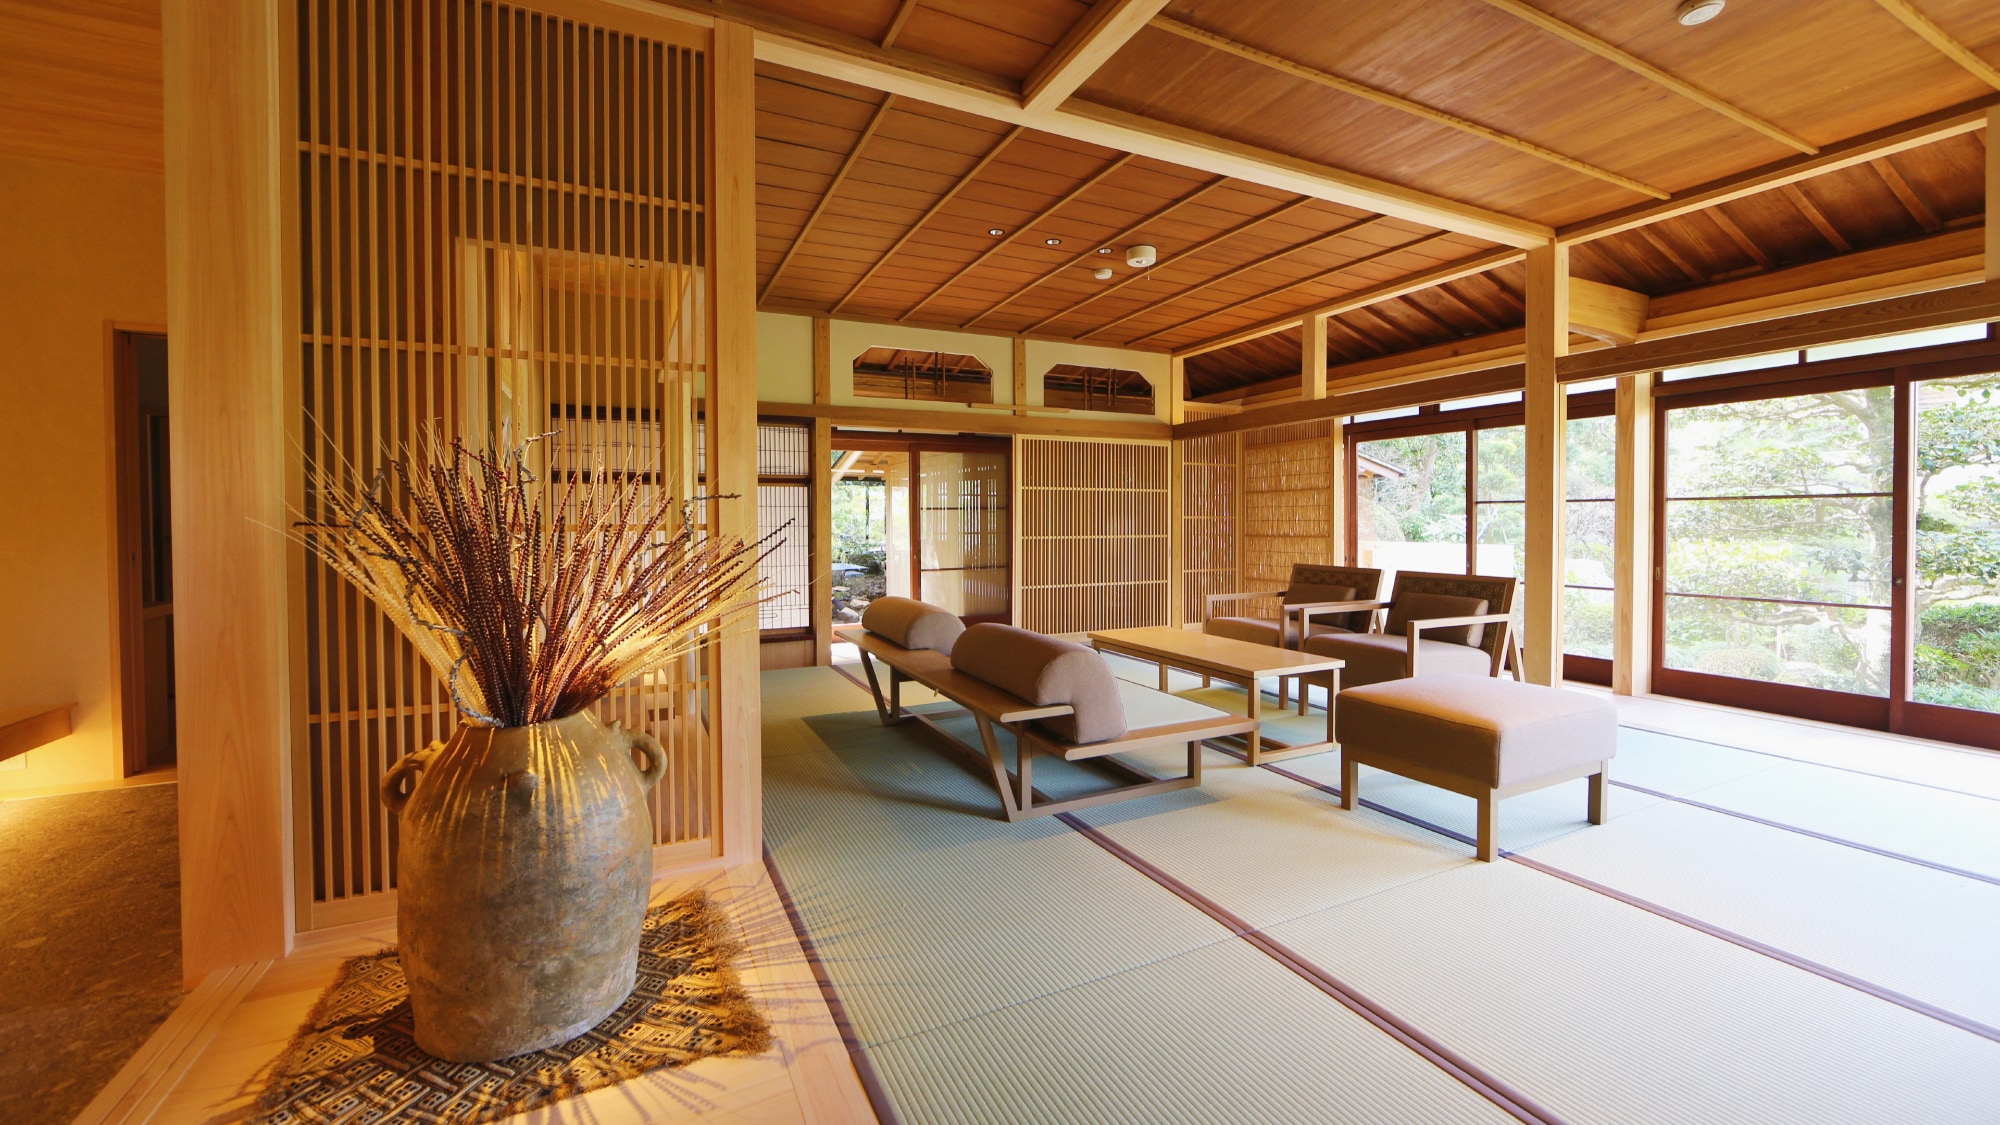 Living room with a modern Japanese taste in the villa "Aioi"